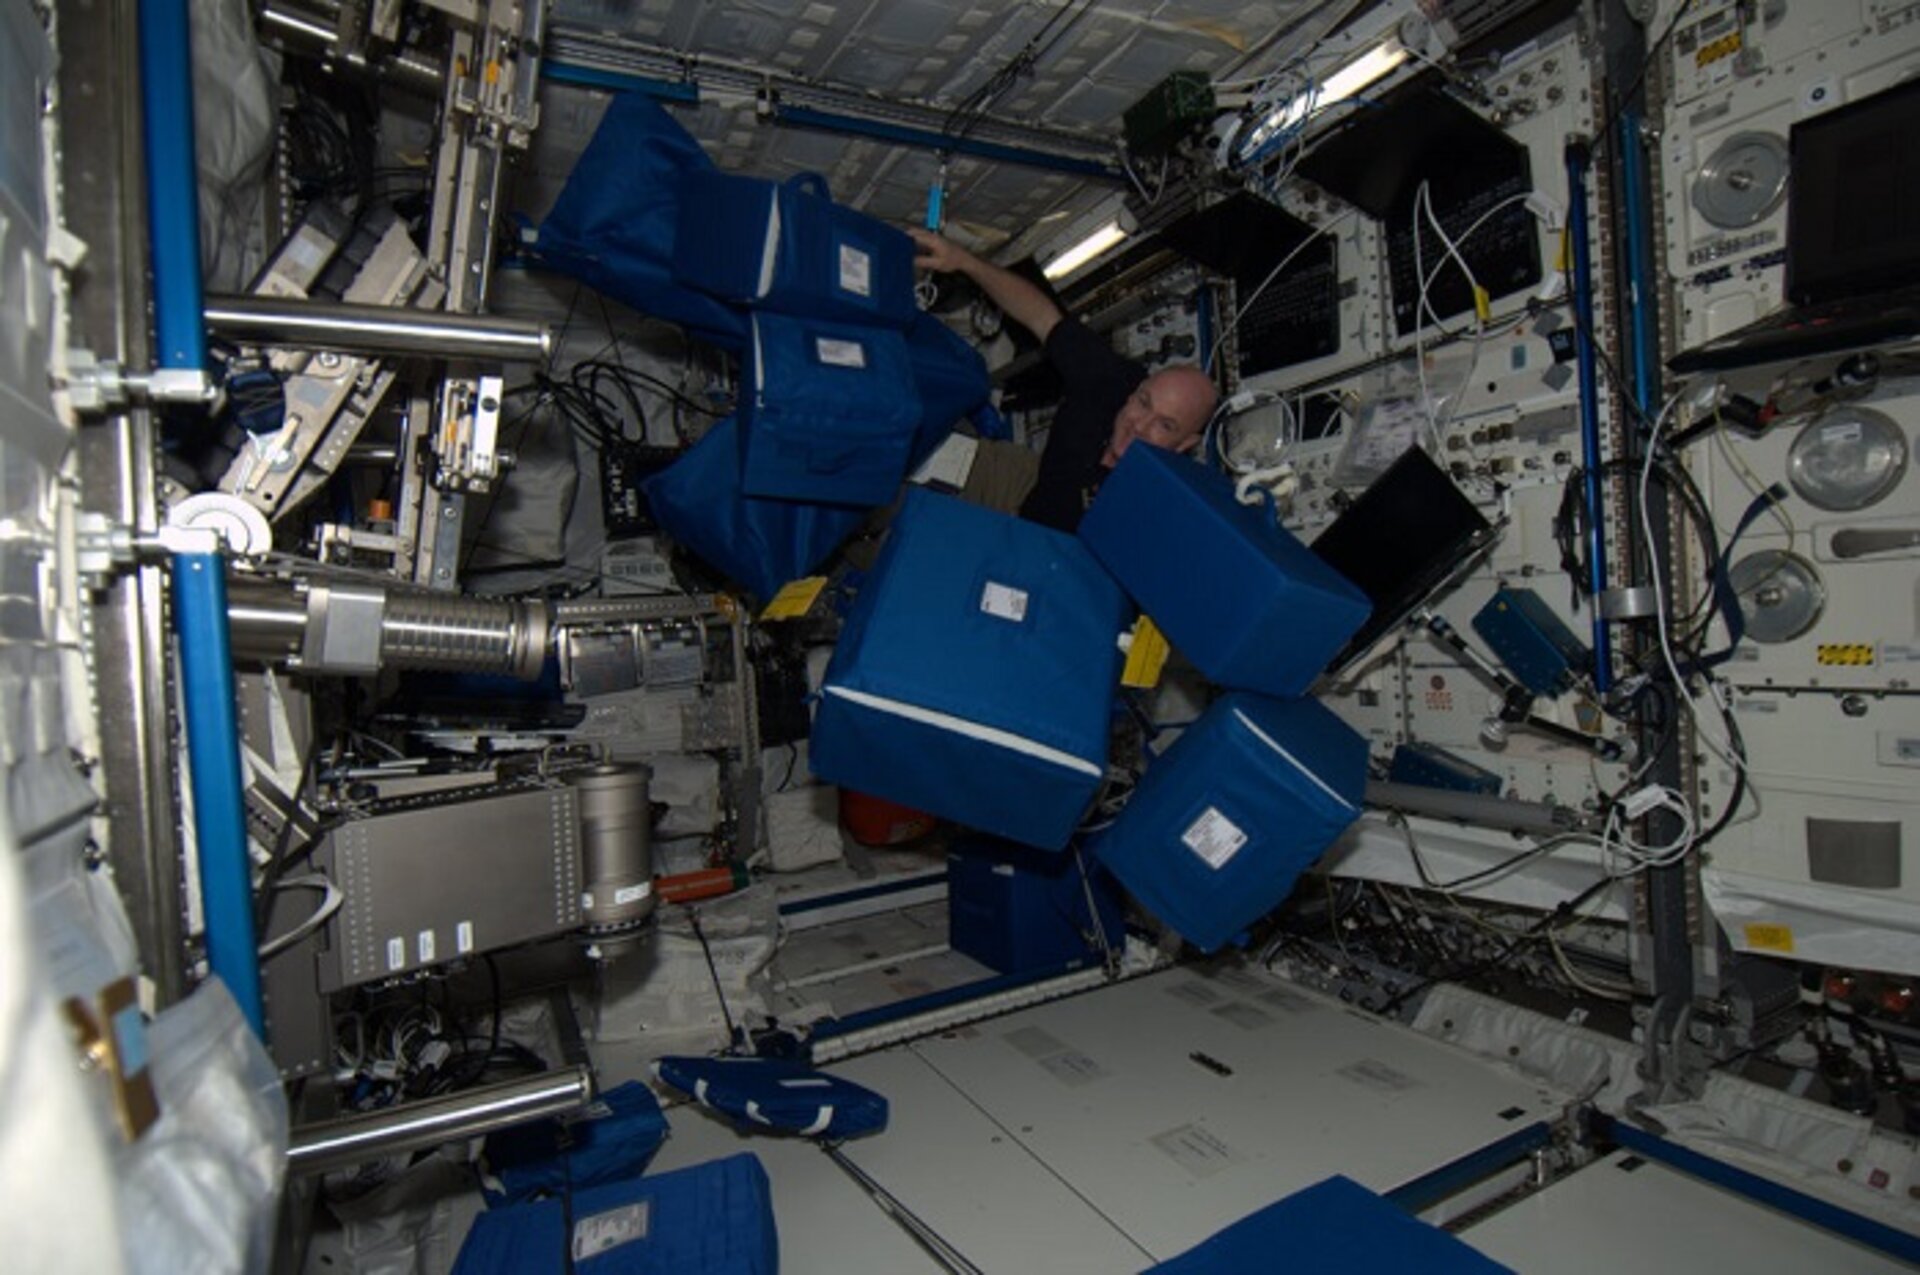 Astronaut André Kuipers with textile transportation bags at ISS